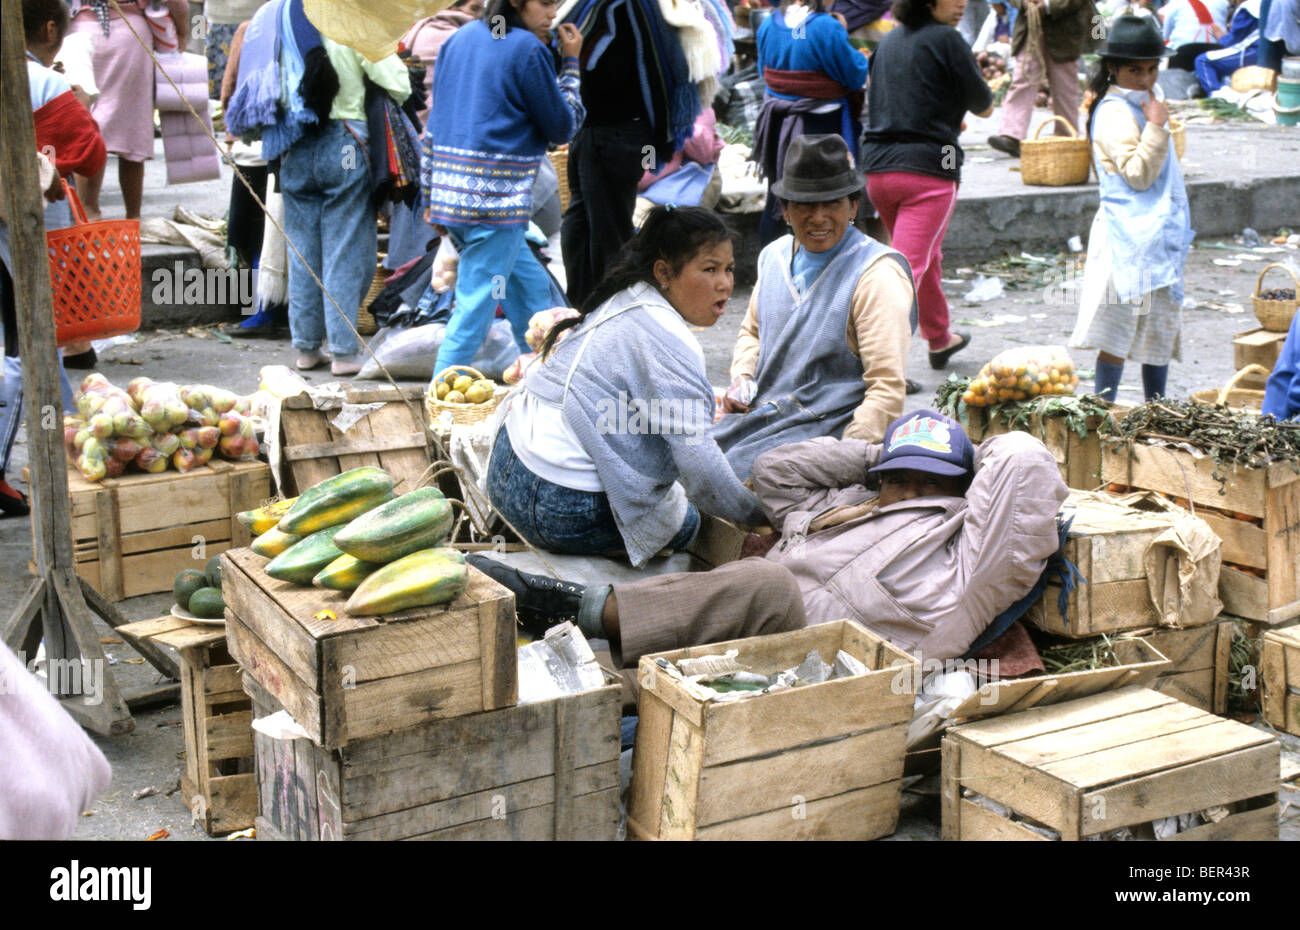 Two women sit up amongst small wooden boxes surrounded by fruits for sale.  Local upland Ecuador market. Stock Photo